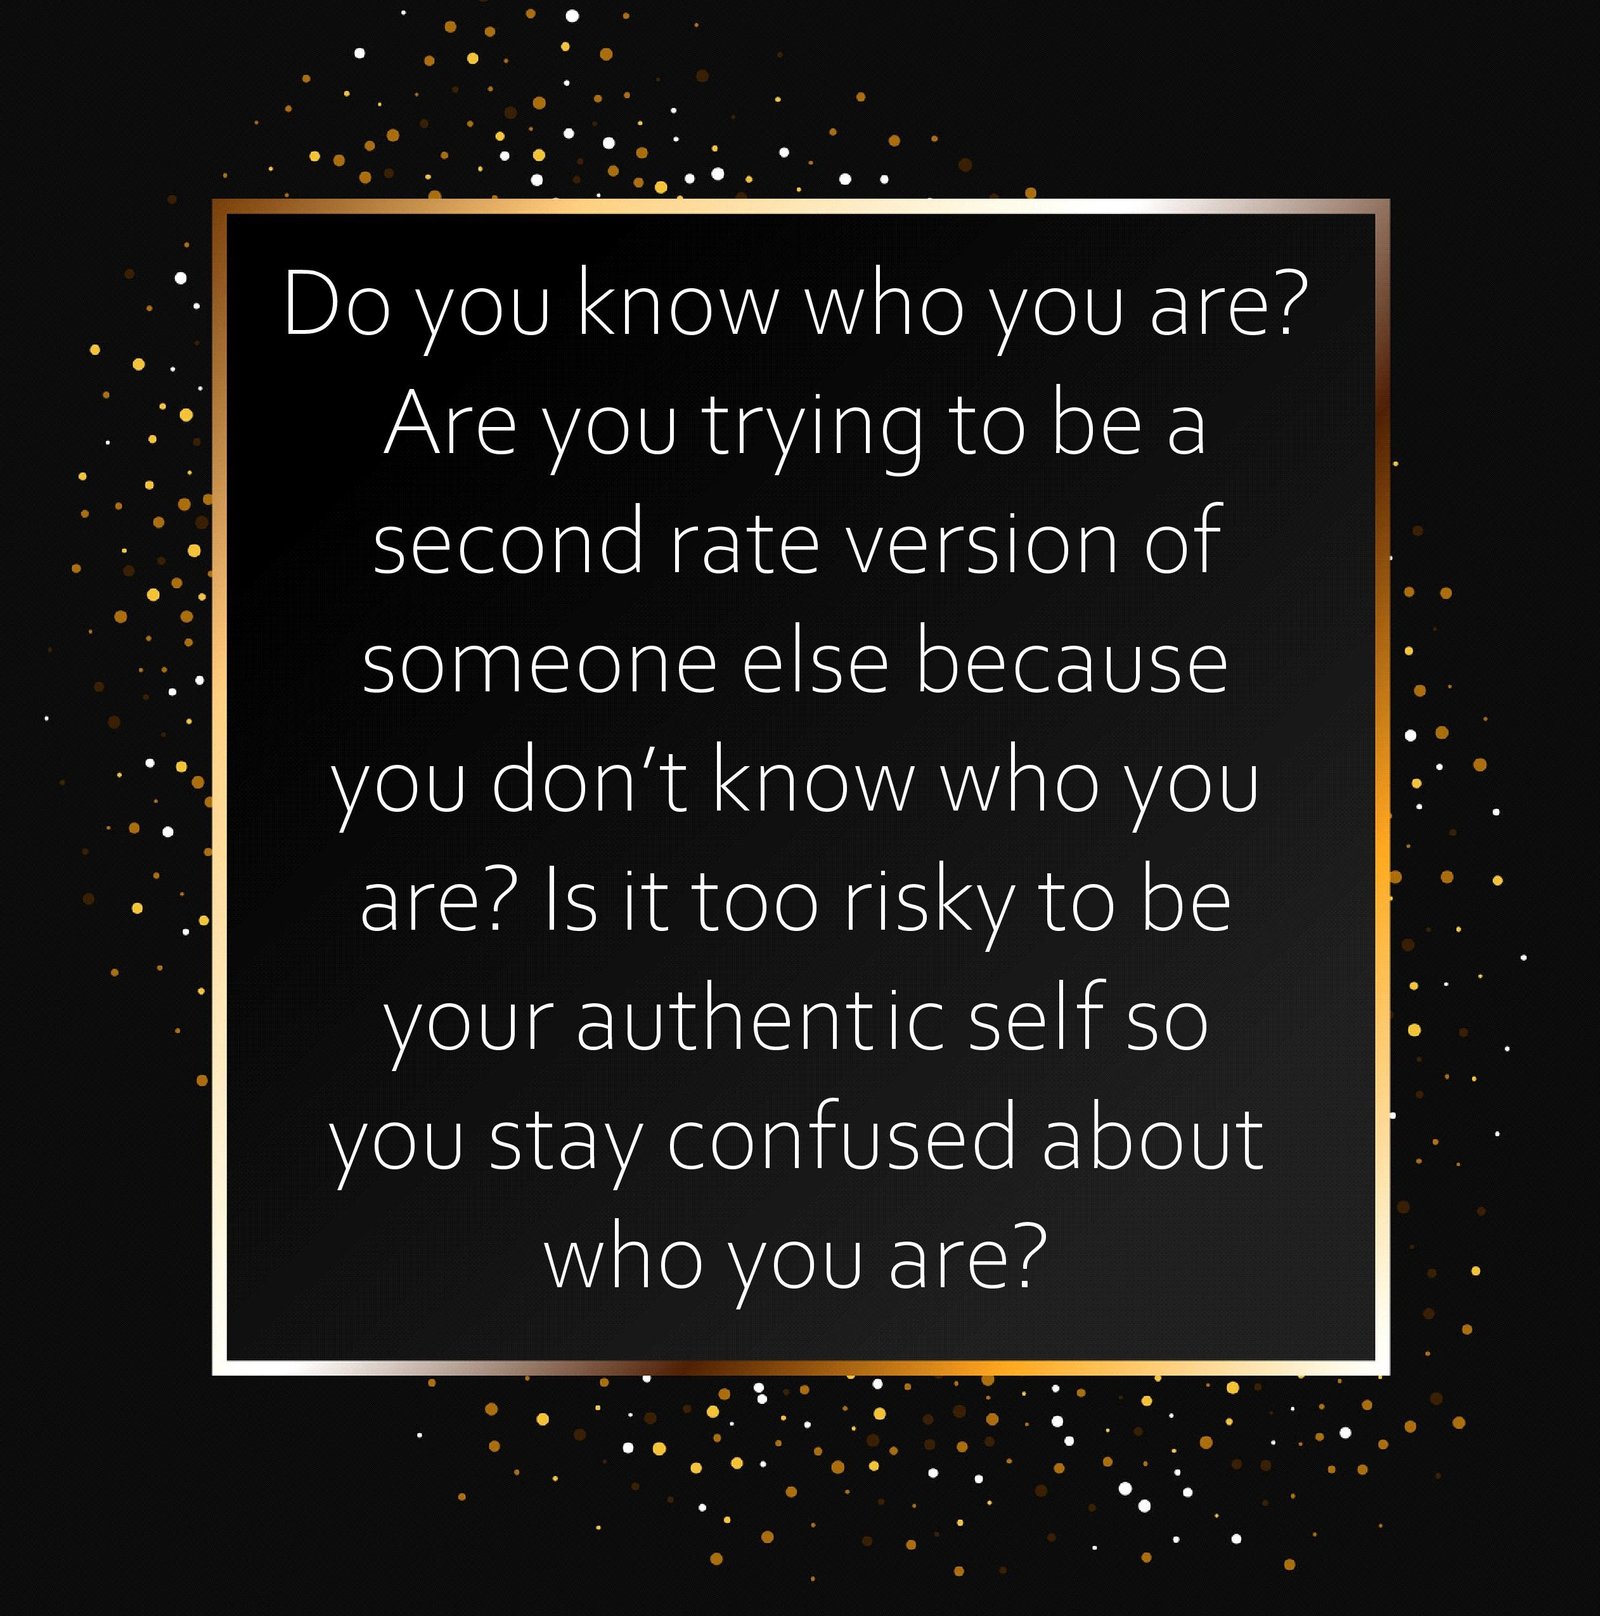 Do you know who you are second rate